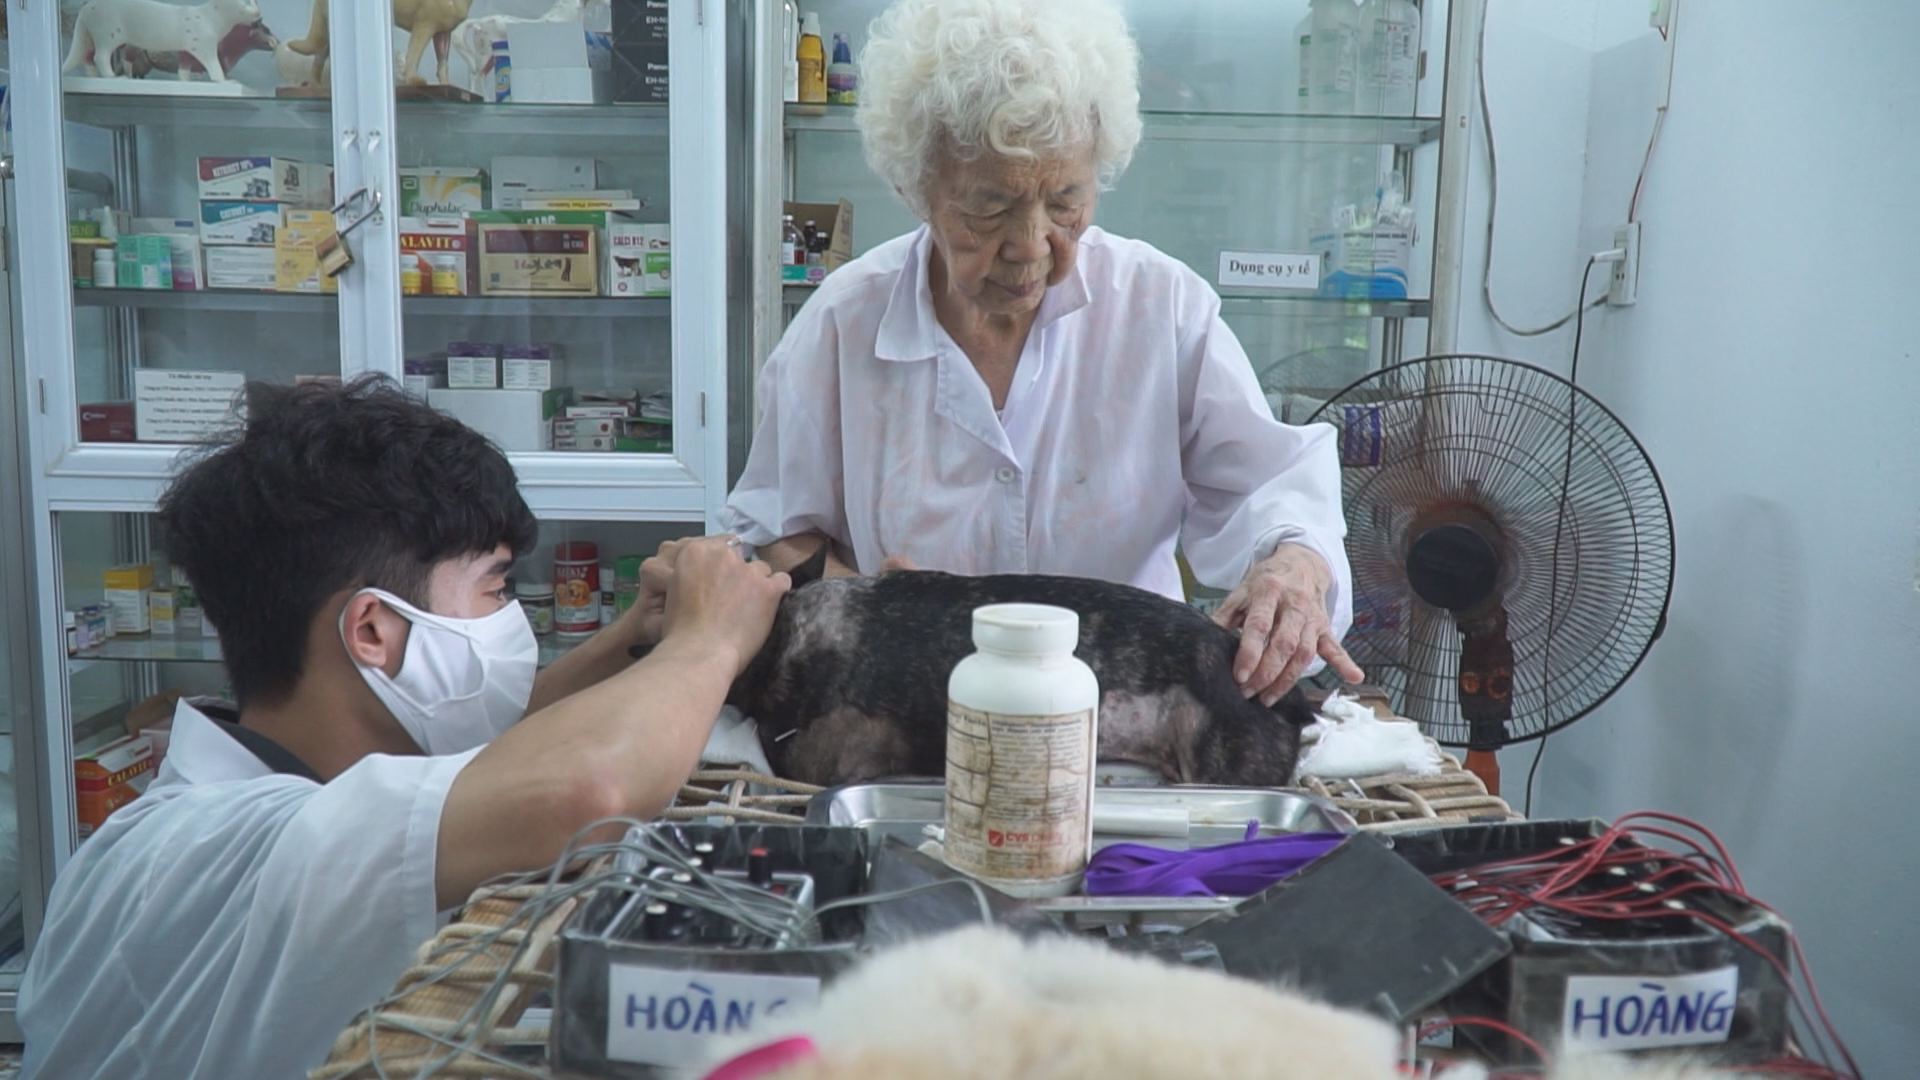 Octogenarian offers free acupuncture to cure animals in Hanoi